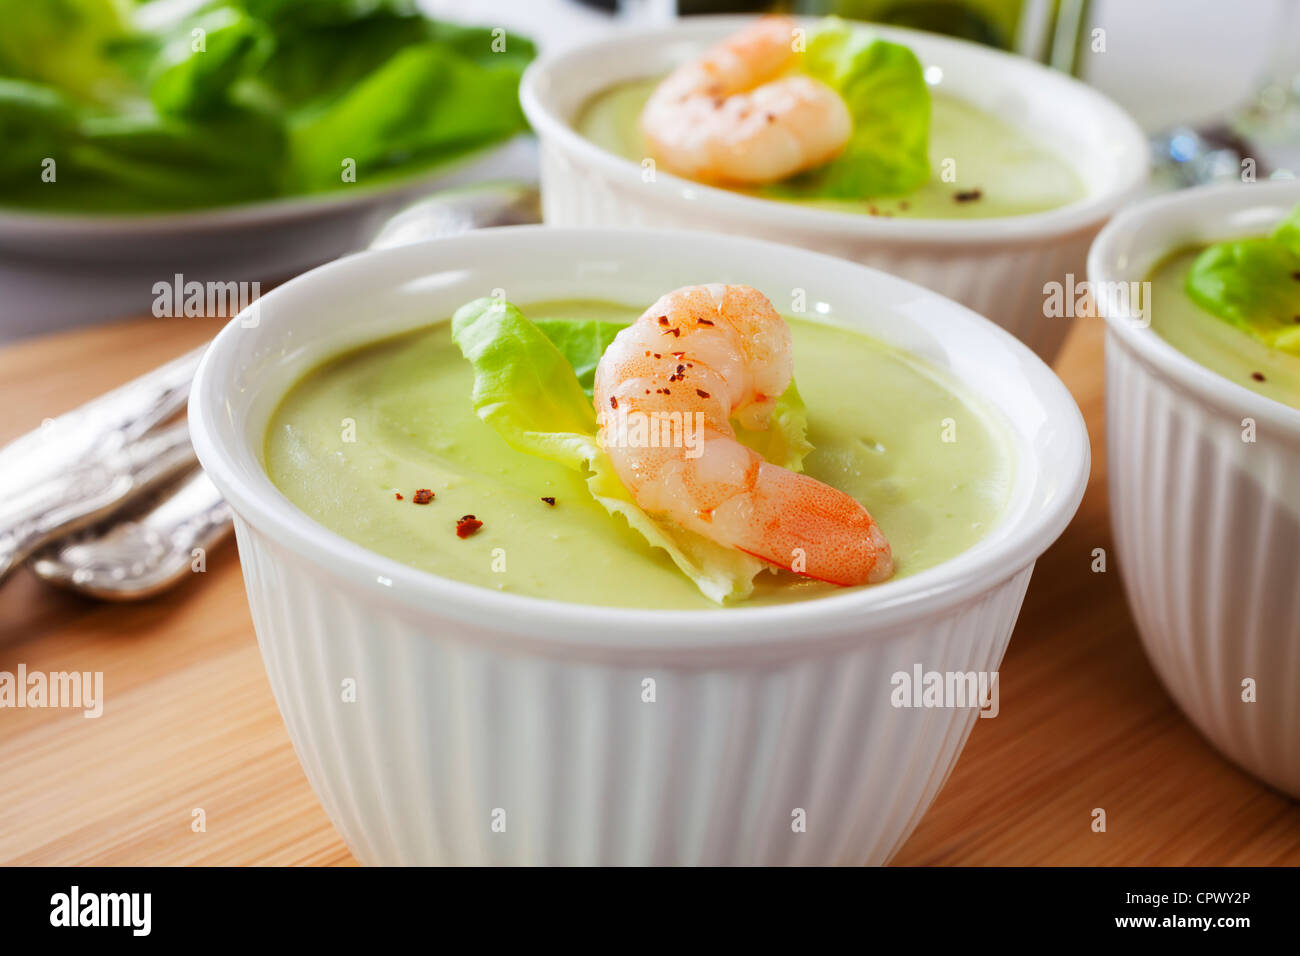 Avocado mousse in a ramekin, topped with prawn and lettuce. Stock Photo